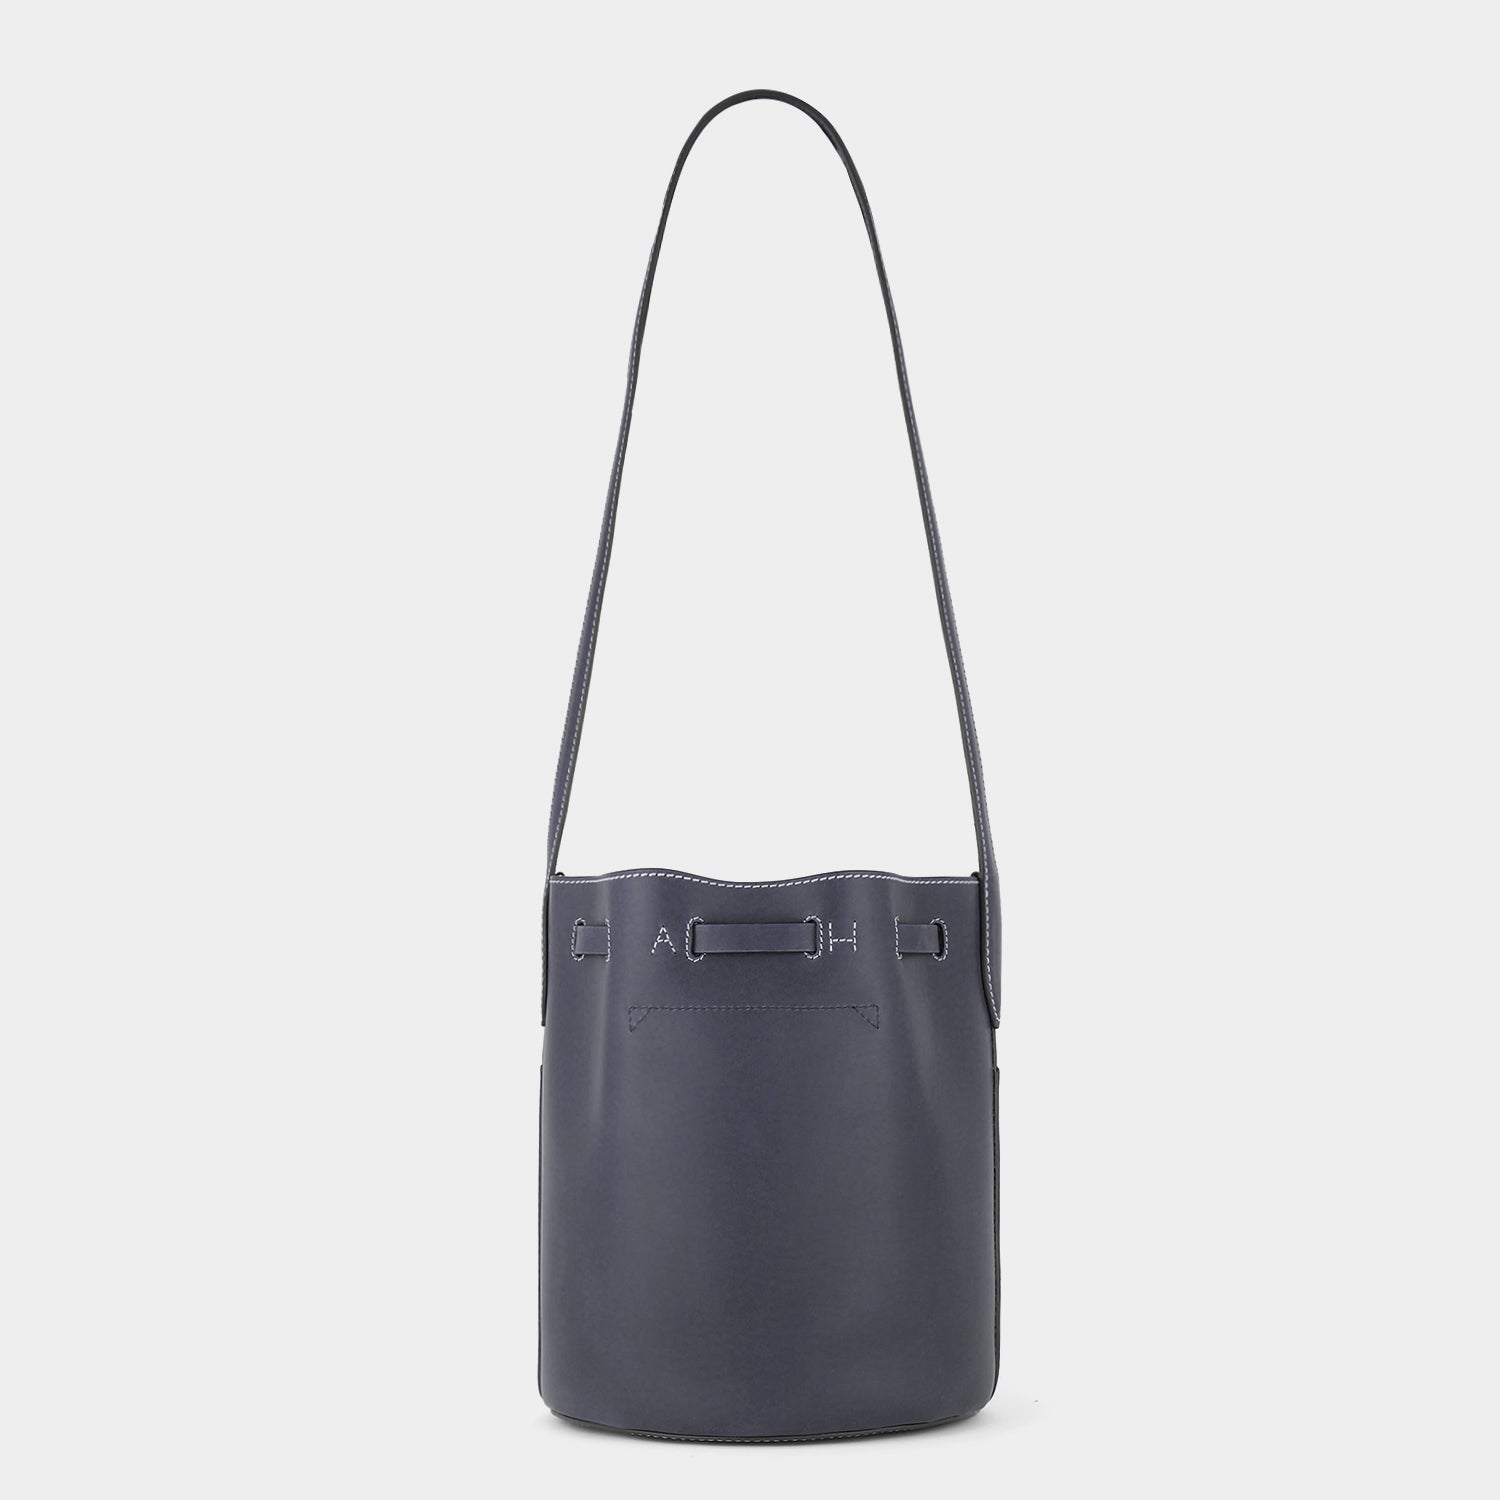 Return to Nature Small Bucket Bag -

                  
                    Compostable Leather in Marine -
                  

                  Anya Hindmarch UK
